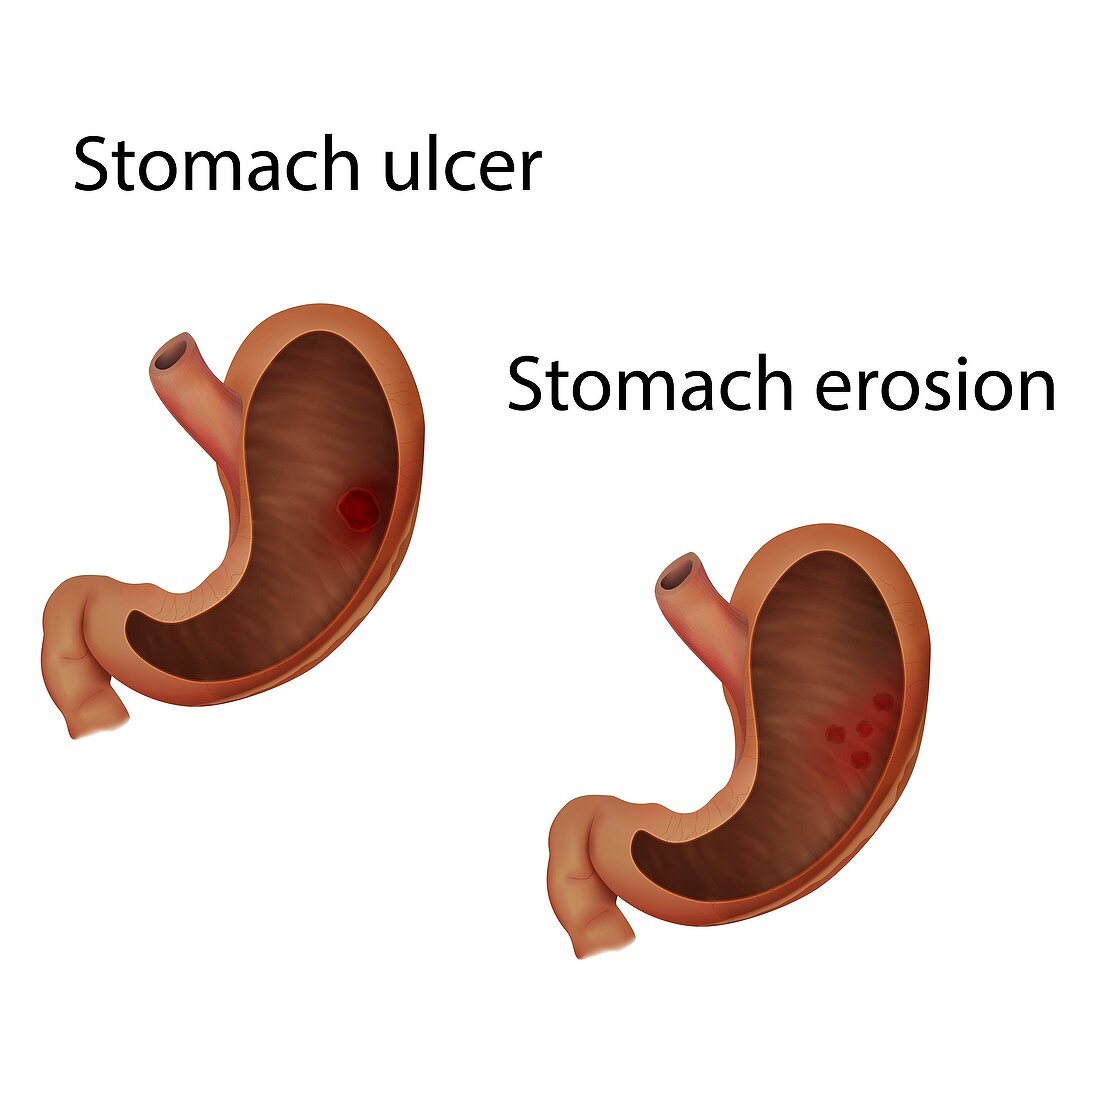 Stomach ulcer and stomach erosion, illustration